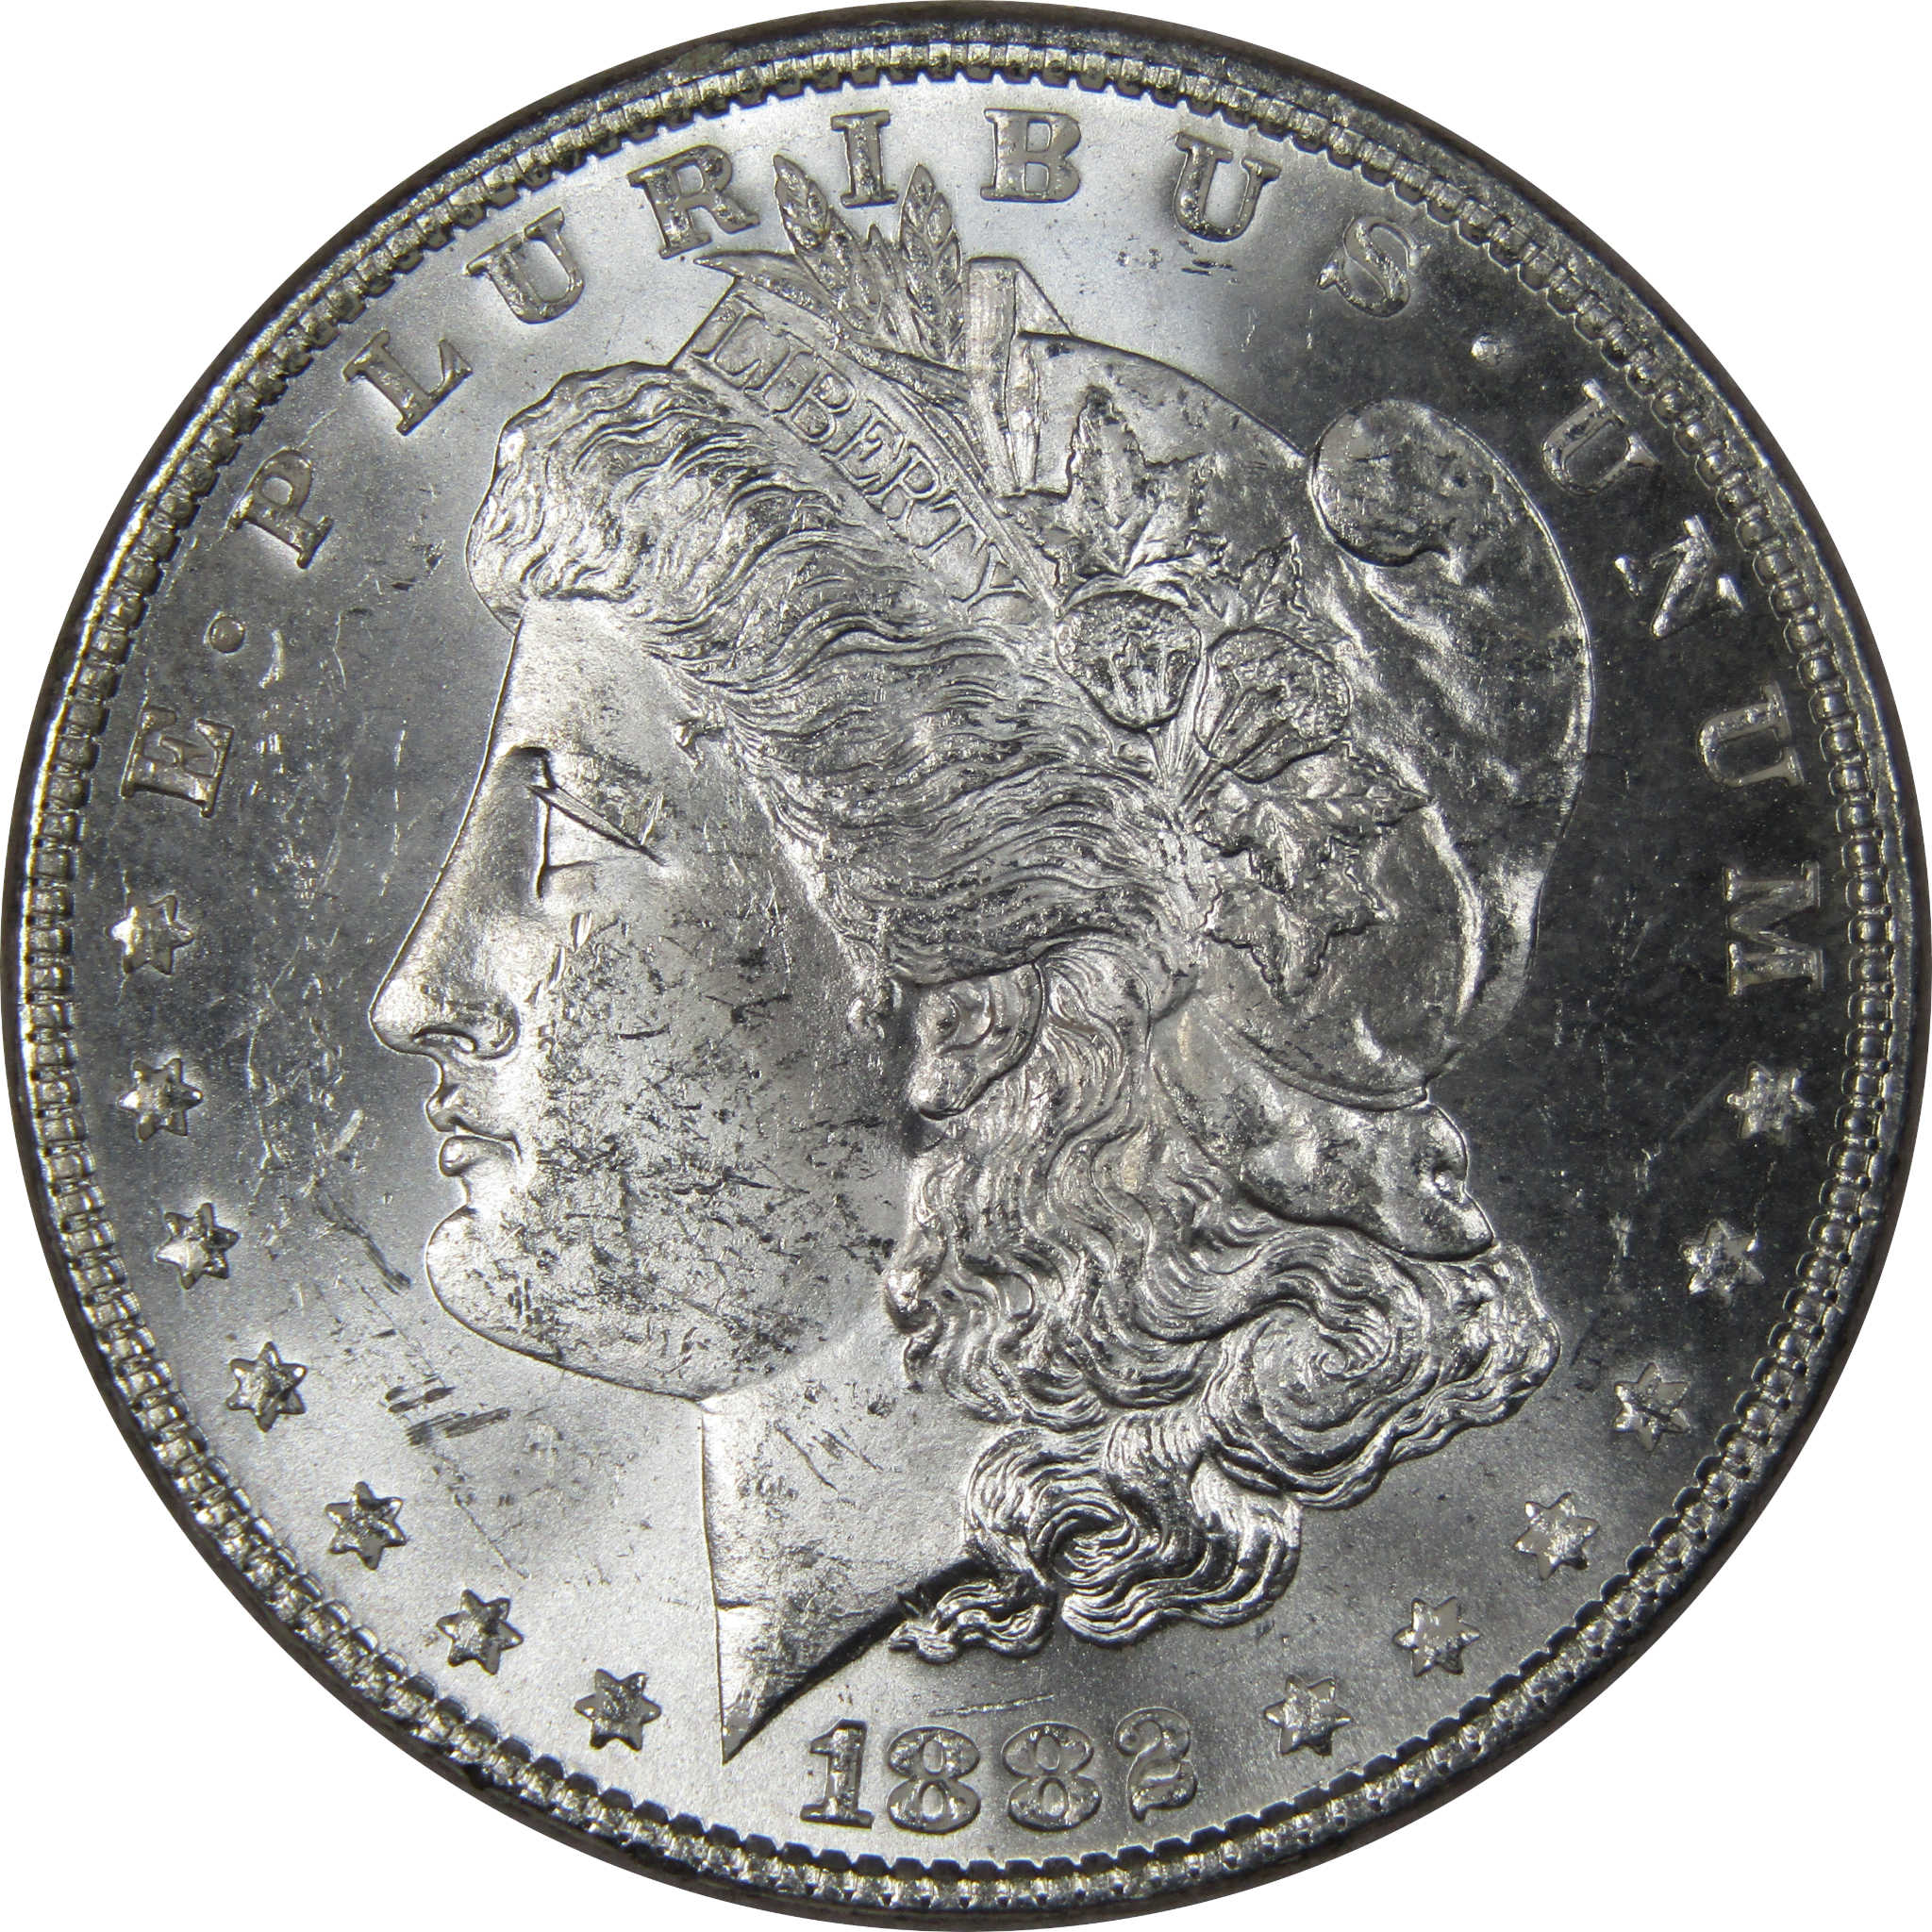 1882 Morgan Dollar BU Uncirculated Mint State 90% Silver SKU:IPC9708 - Morgan coin - Morgan silver dollar - Morgan silver dollar for sale - Profile Coins &amp; Collectibles